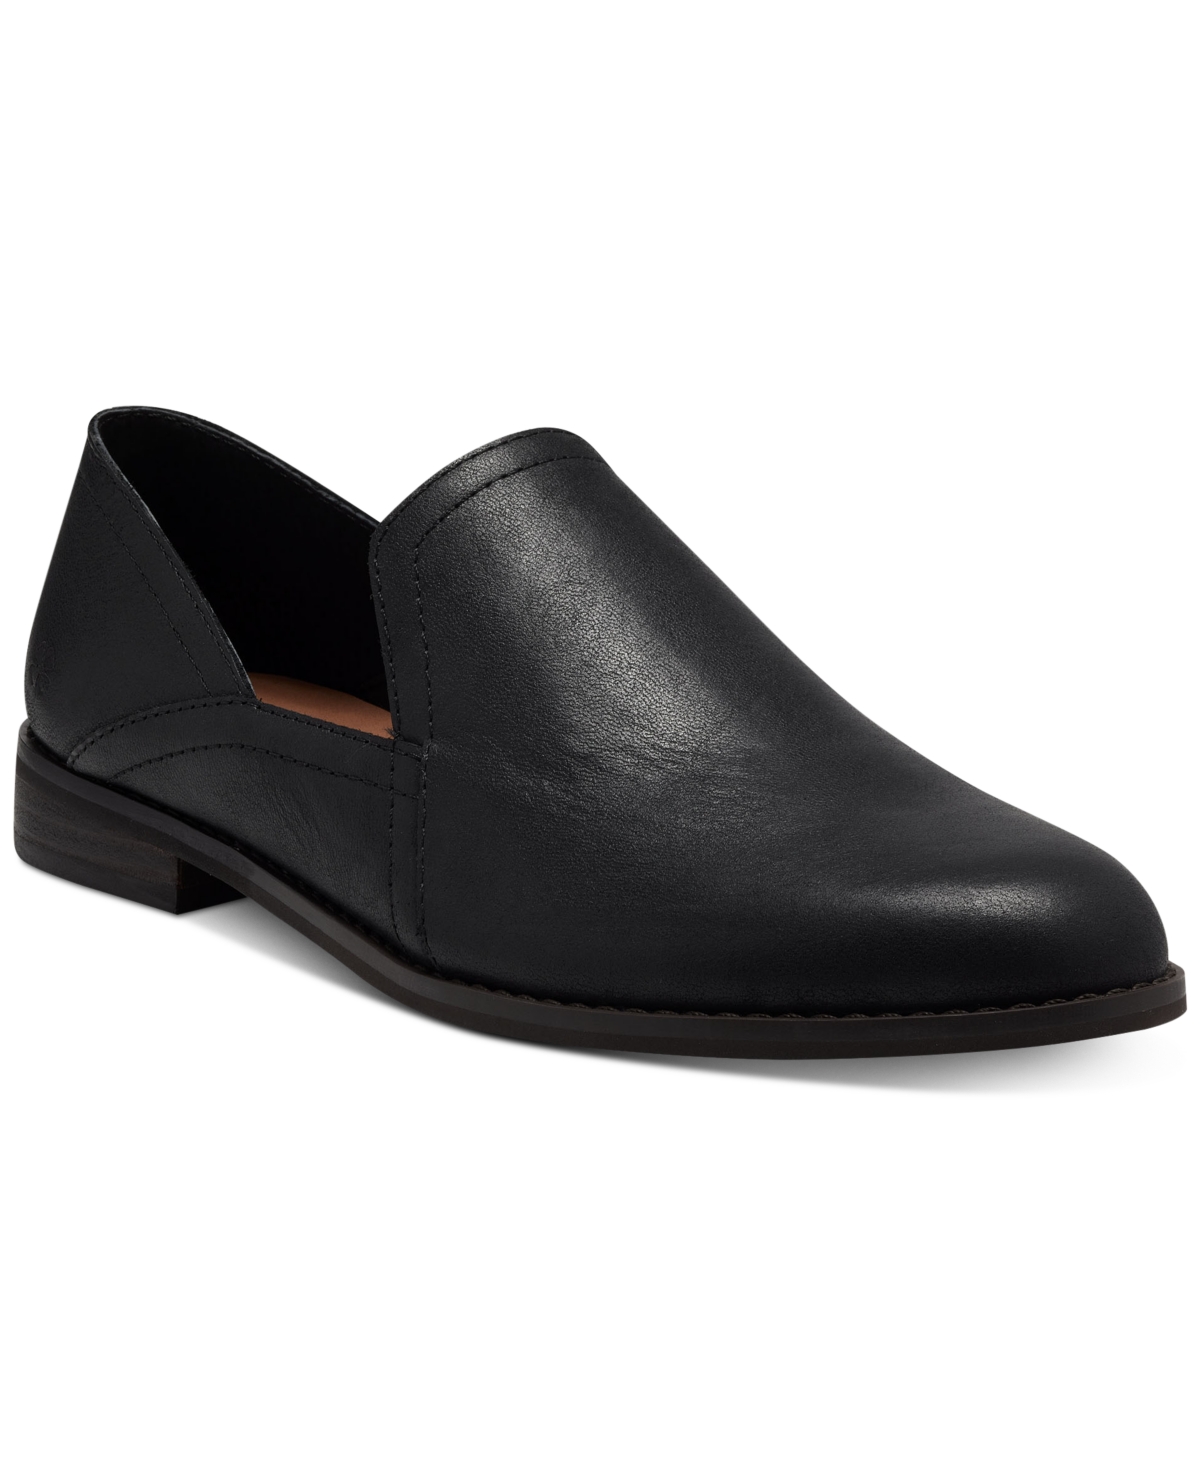 Women's Ellopy Cutout Flat Loafers - Ginger Leather